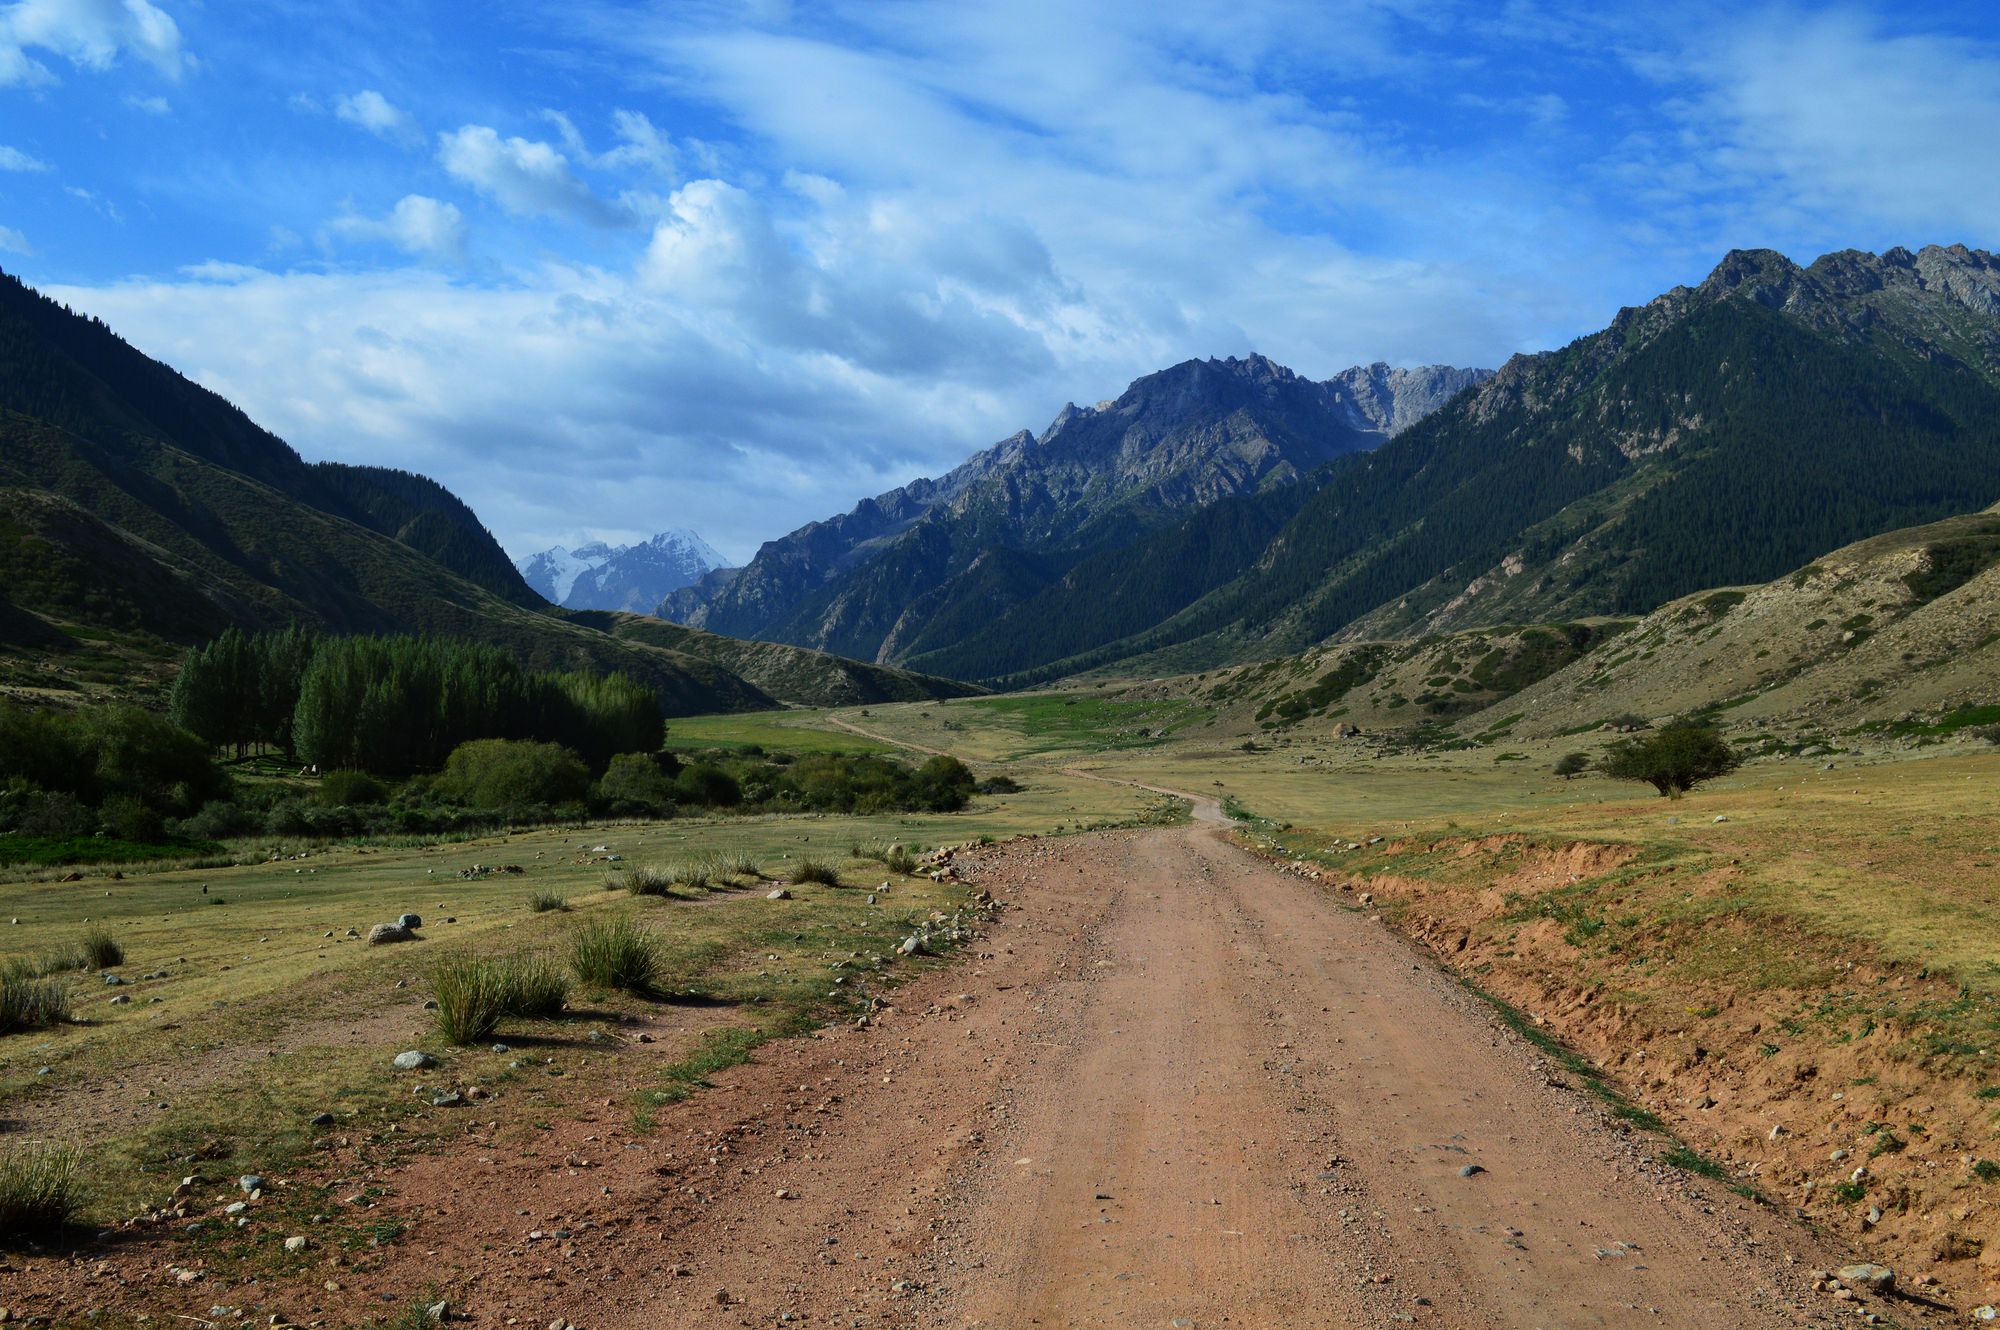 A dirt road in Kyrgyzstan, with expansive mountain views.